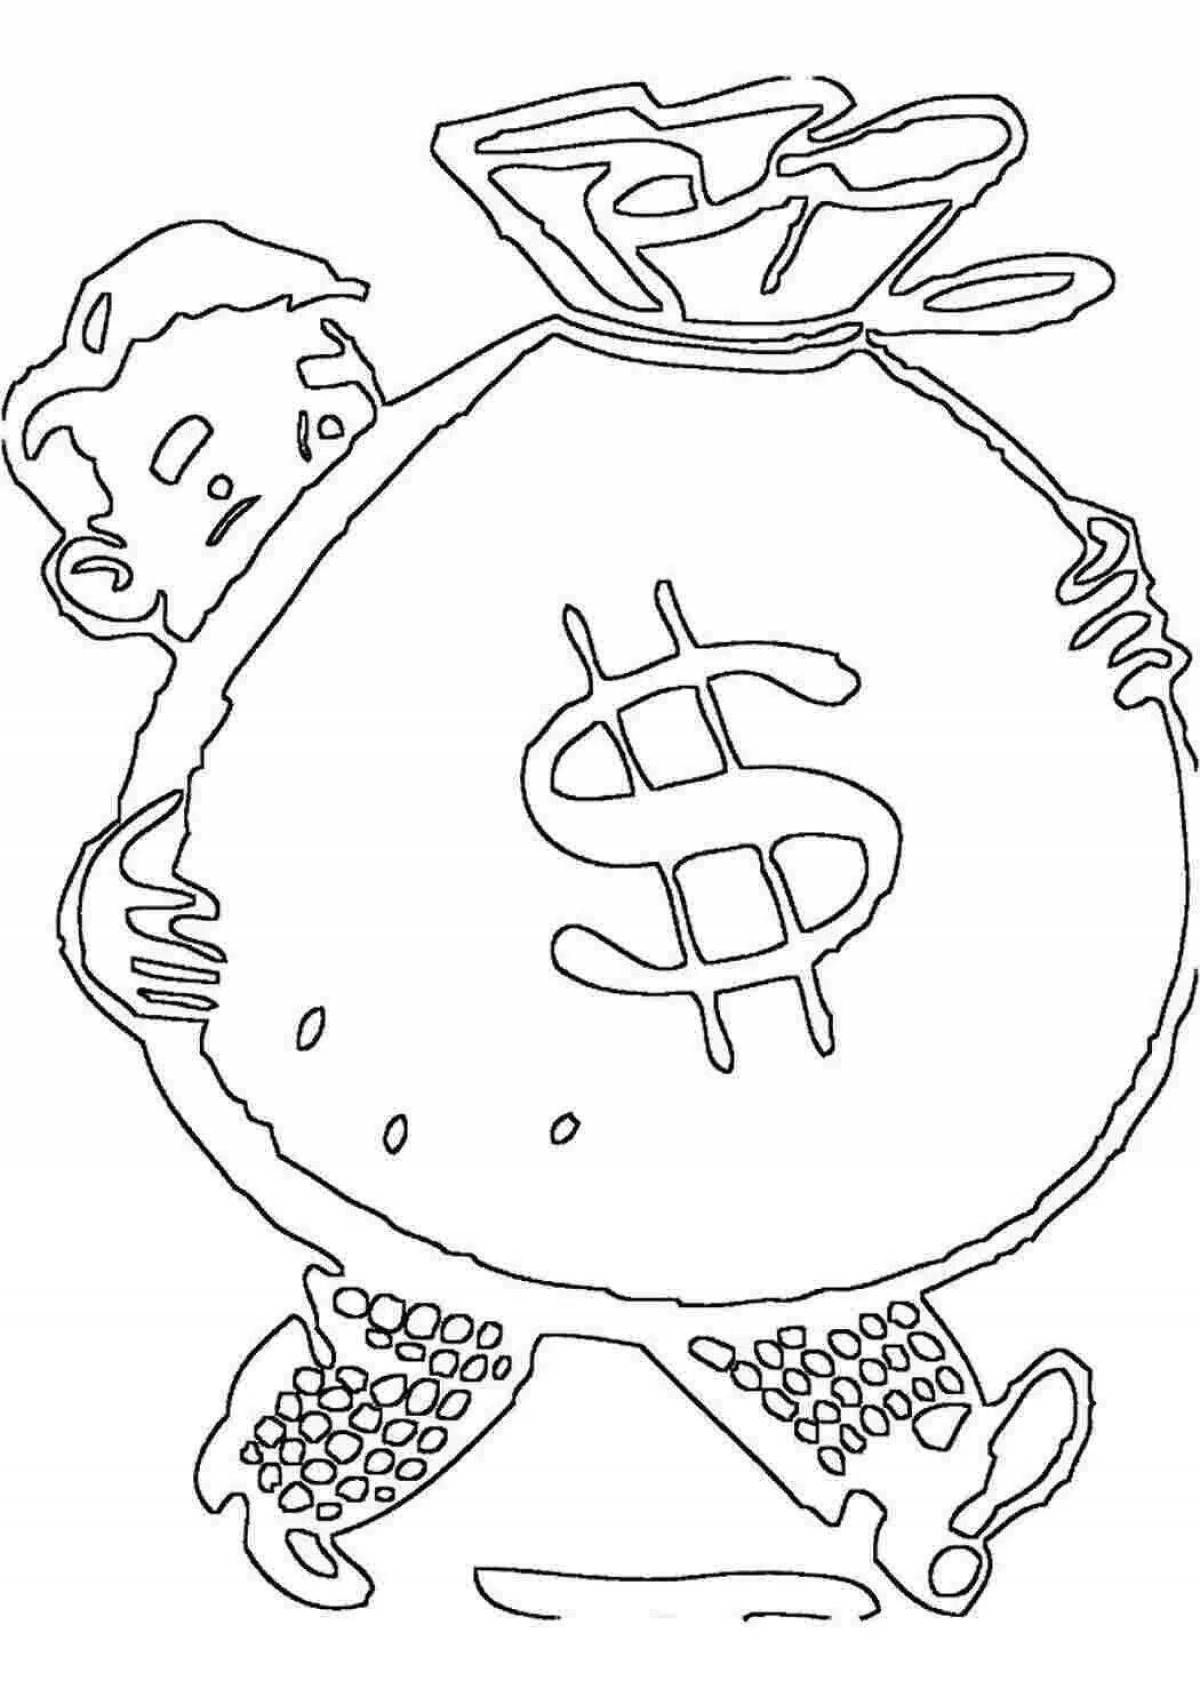 Colorful money coloring book